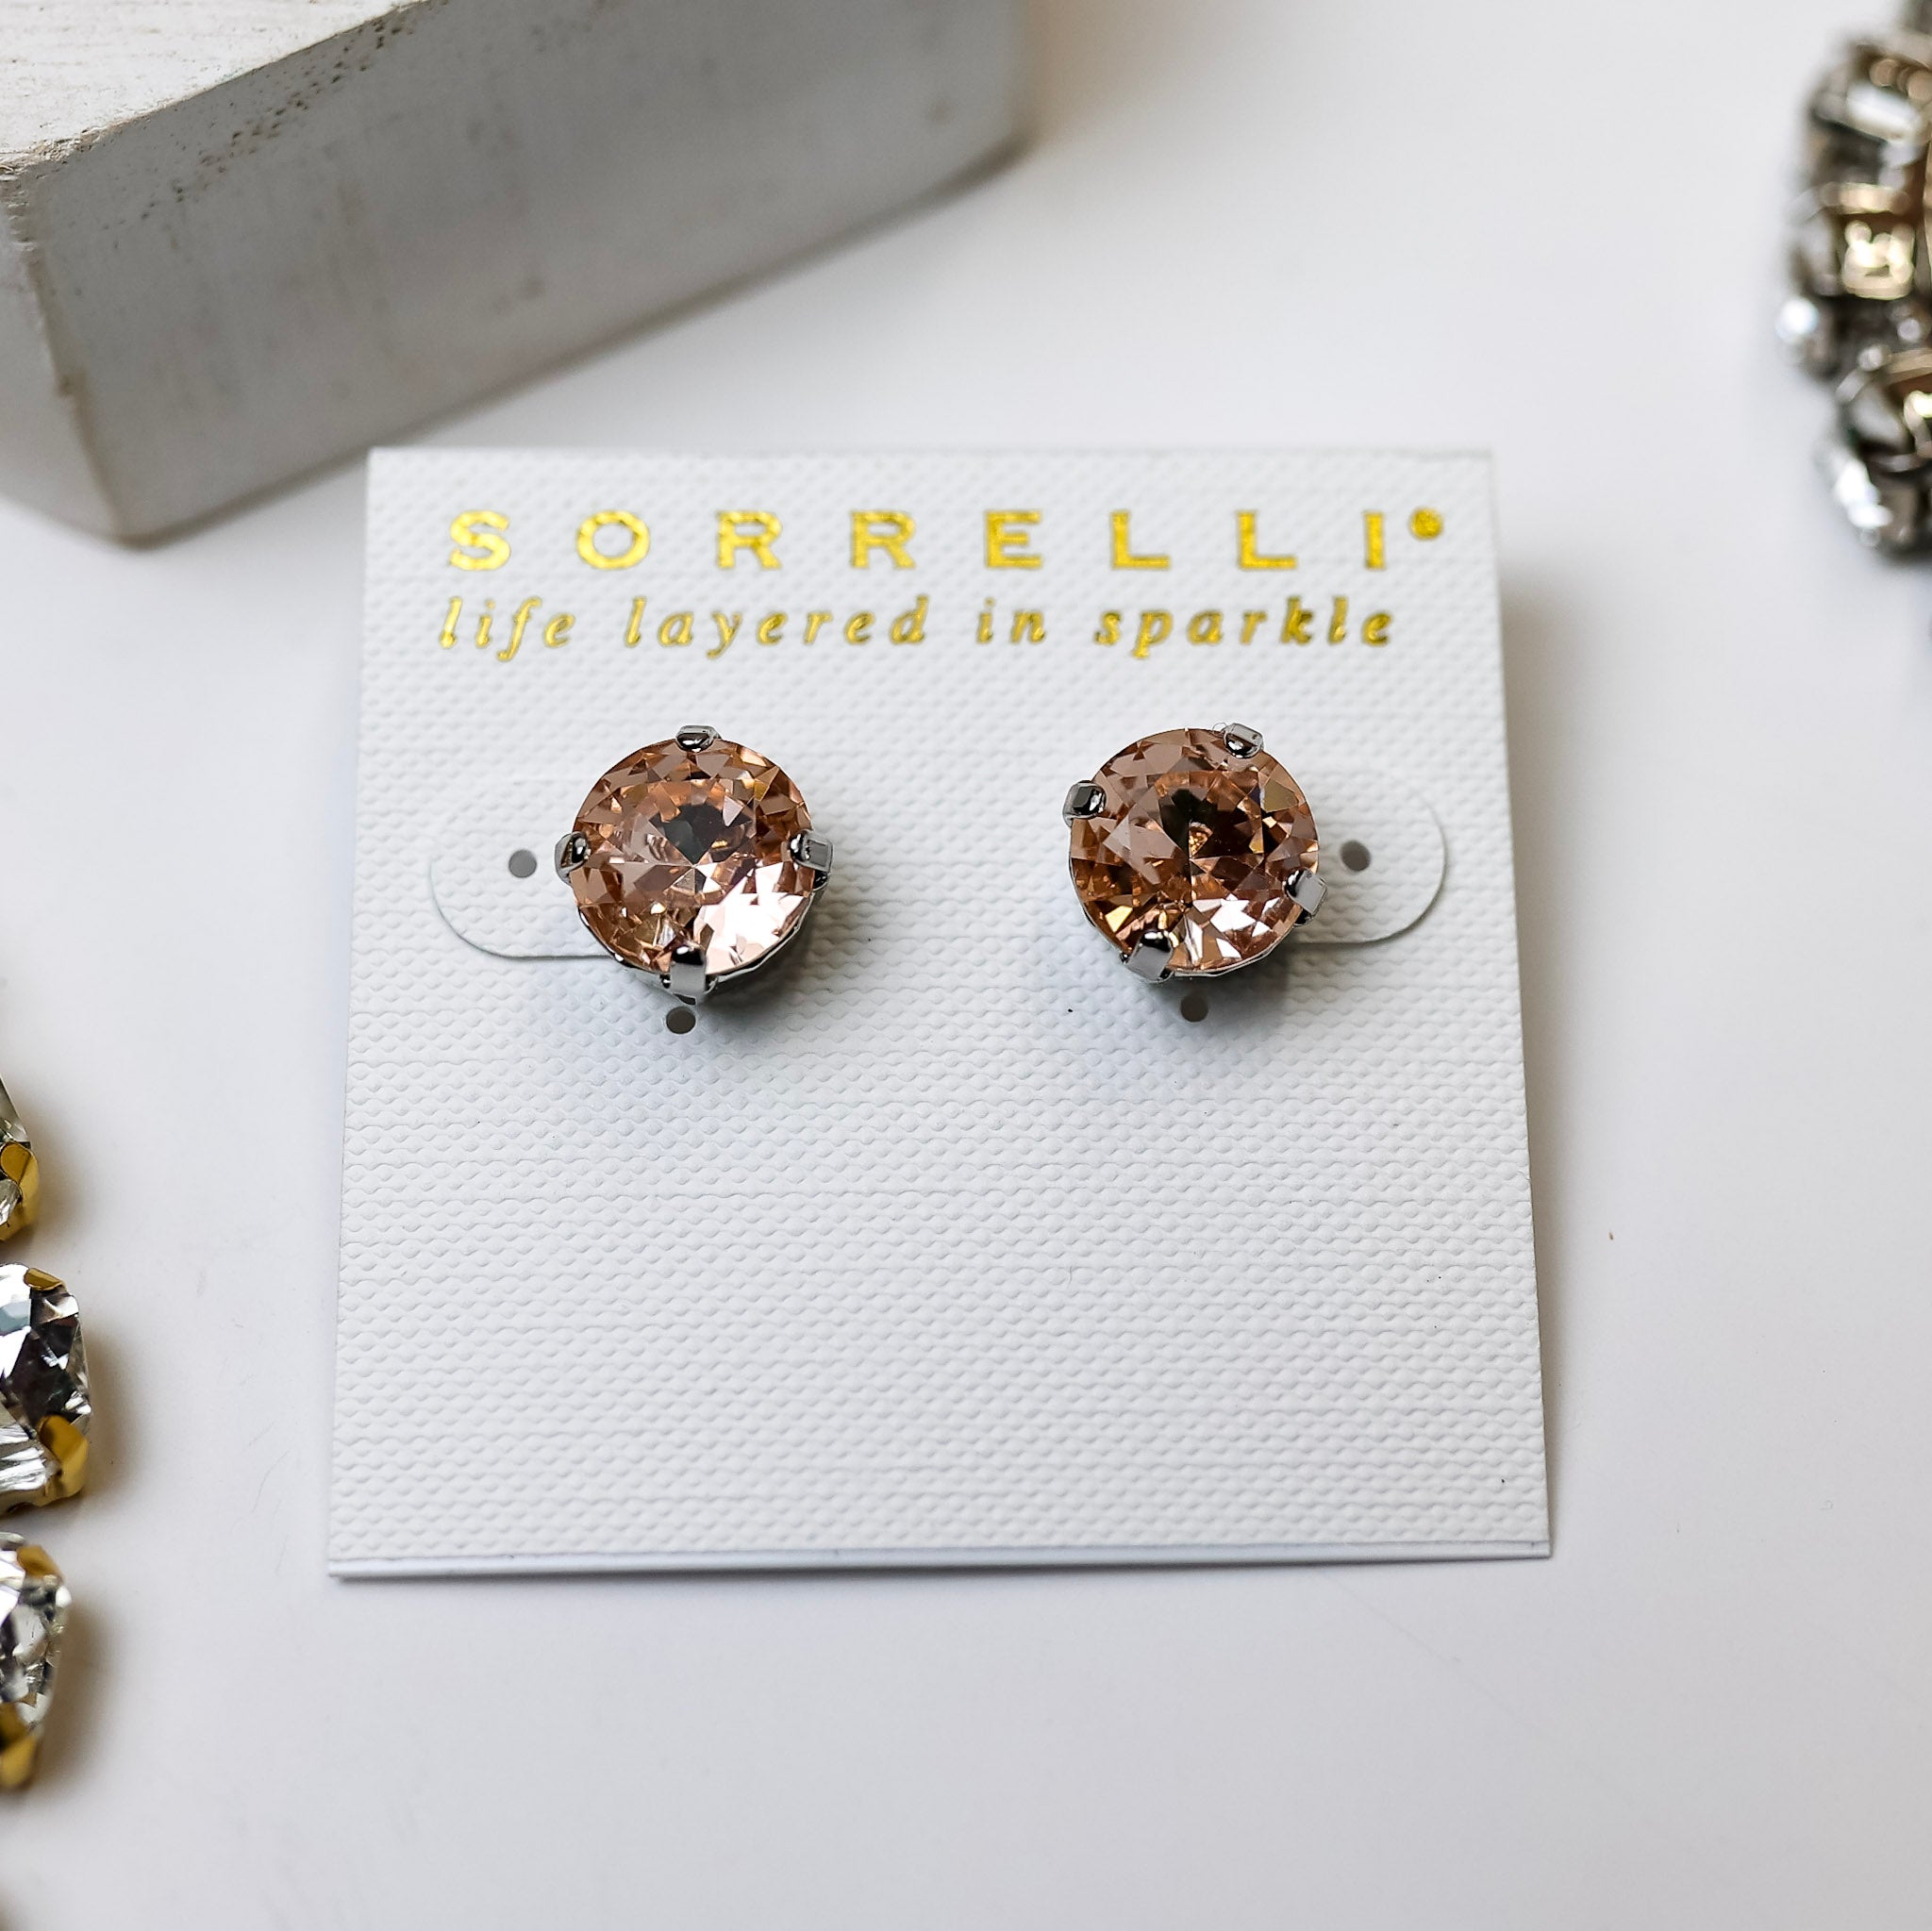 A pair of circle crystal stud earrings that are topaz. These earrings are pictured on a white background with crystal necklaces.